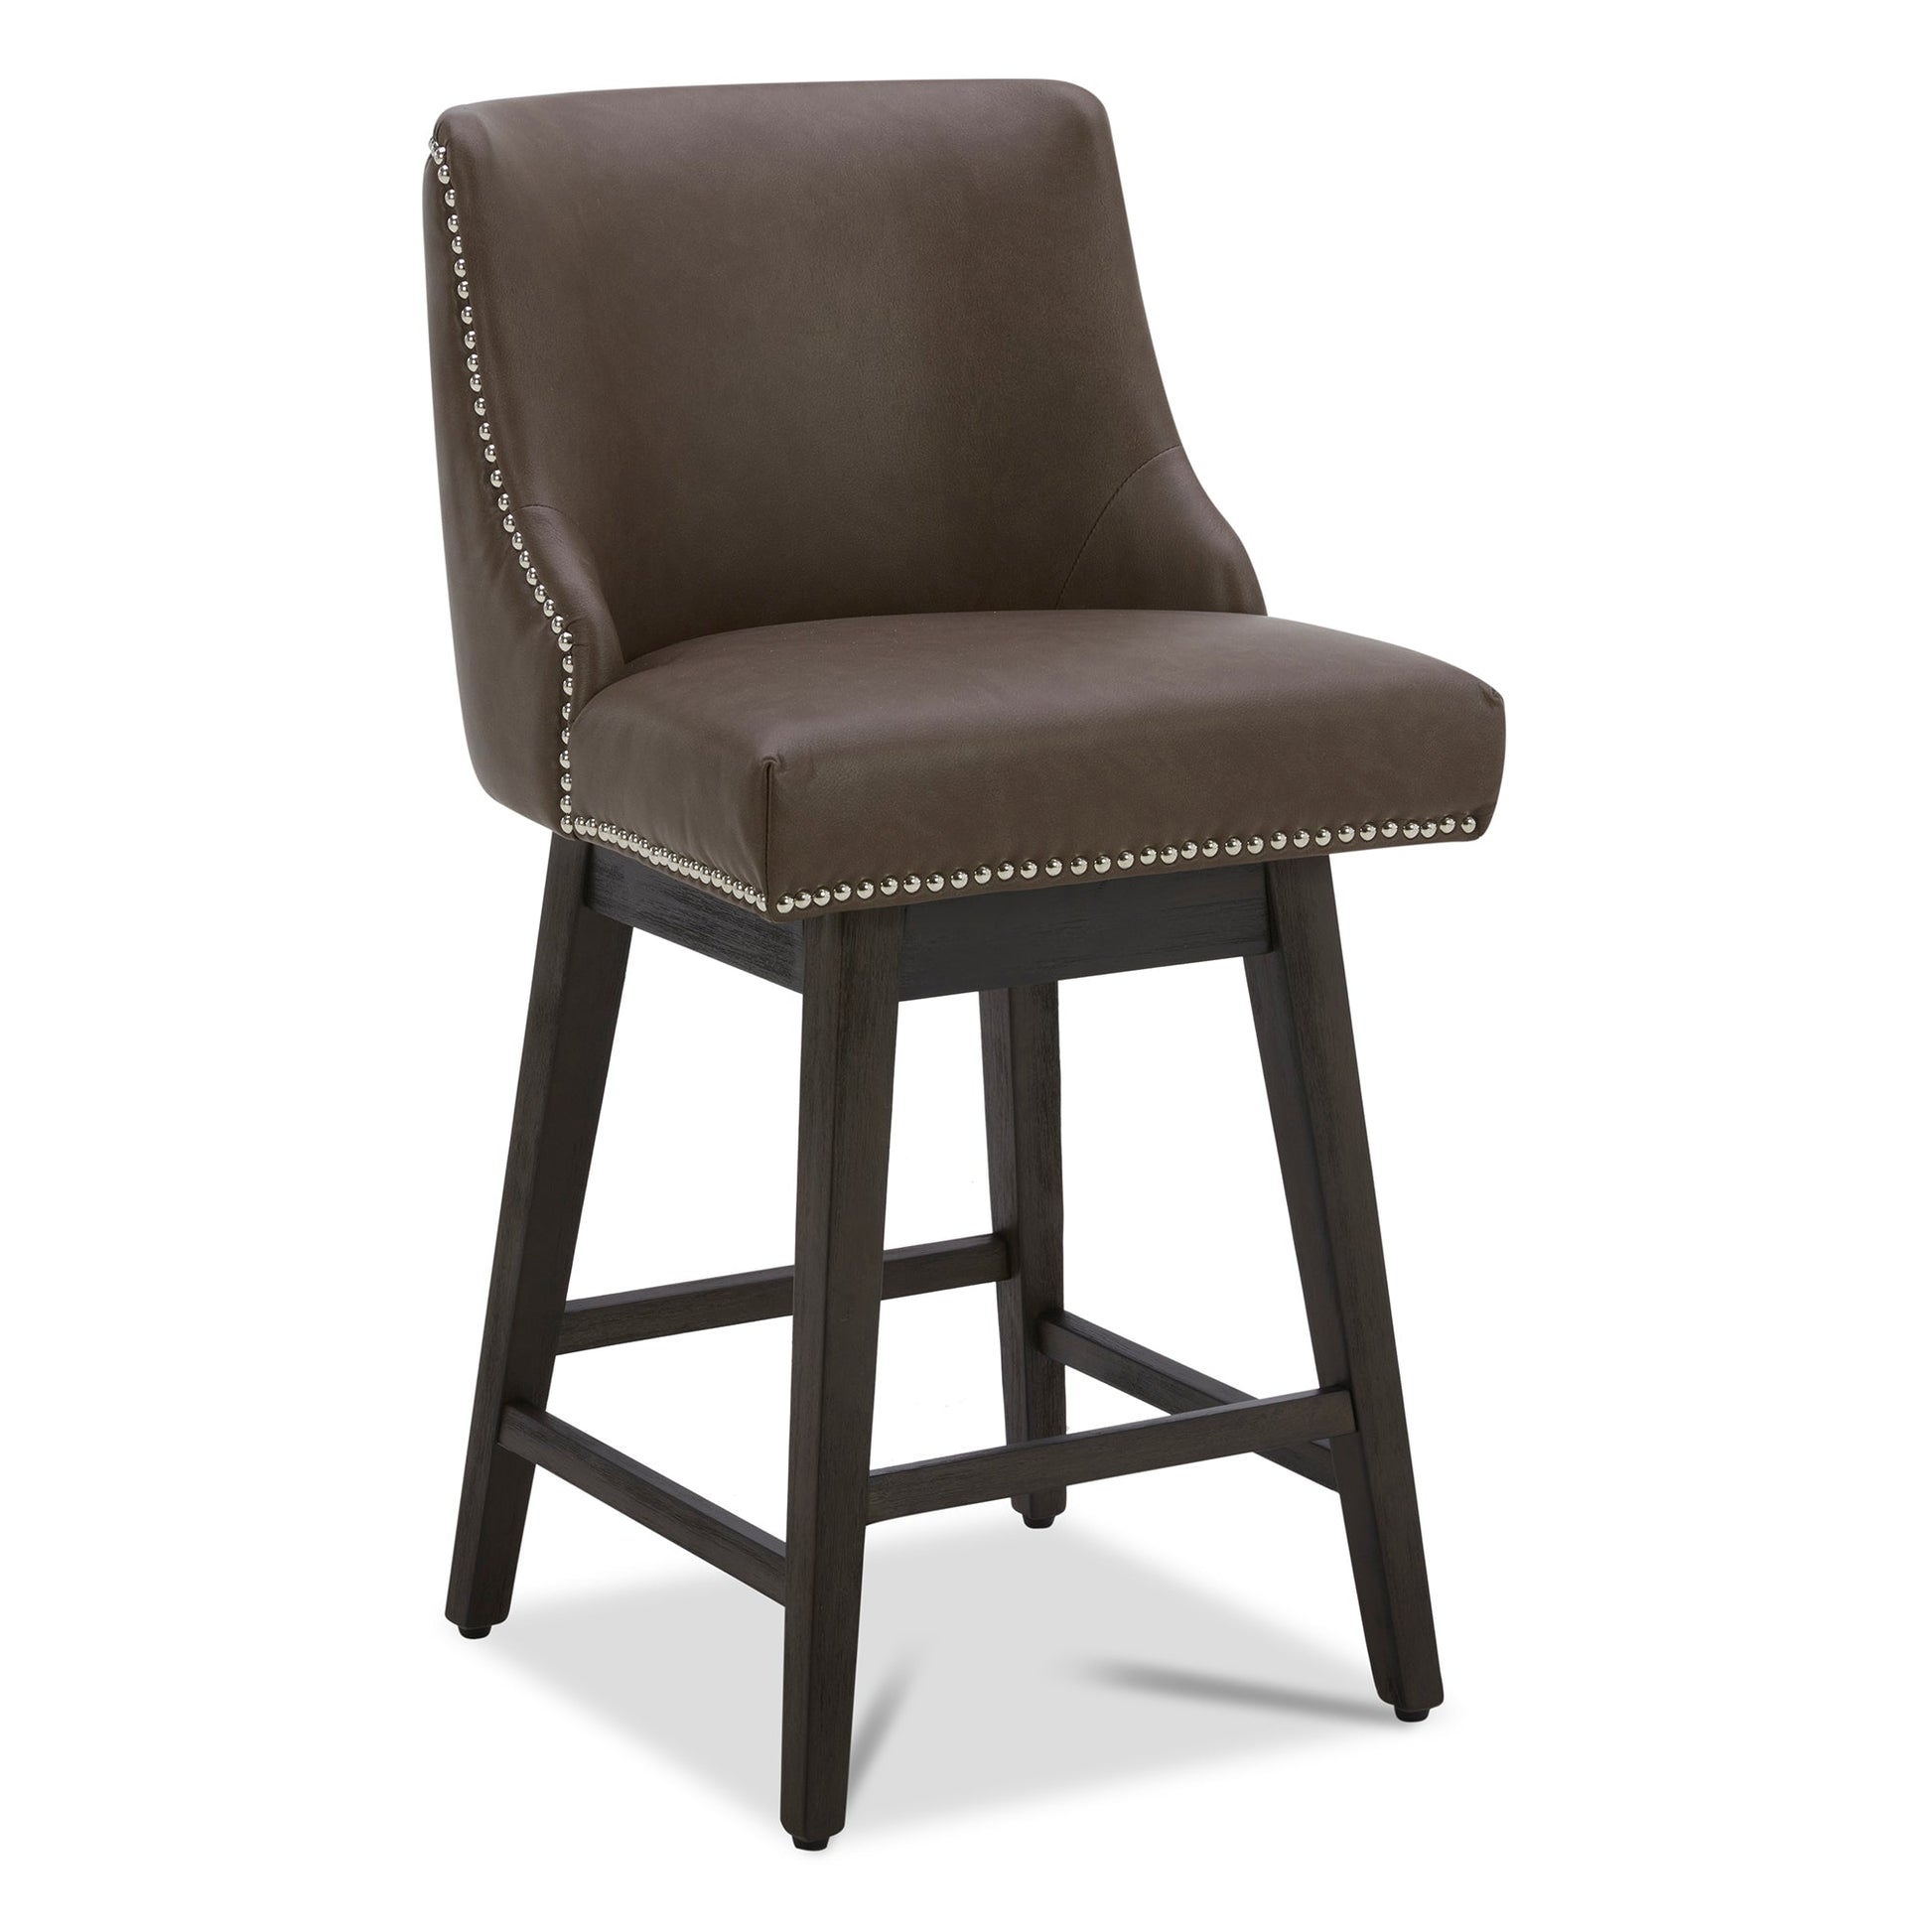 CHITA LIVING-Asher Swivel Counter Stool with Nailhead Trim-Counter Stools-Faux Leather-Chocolate-